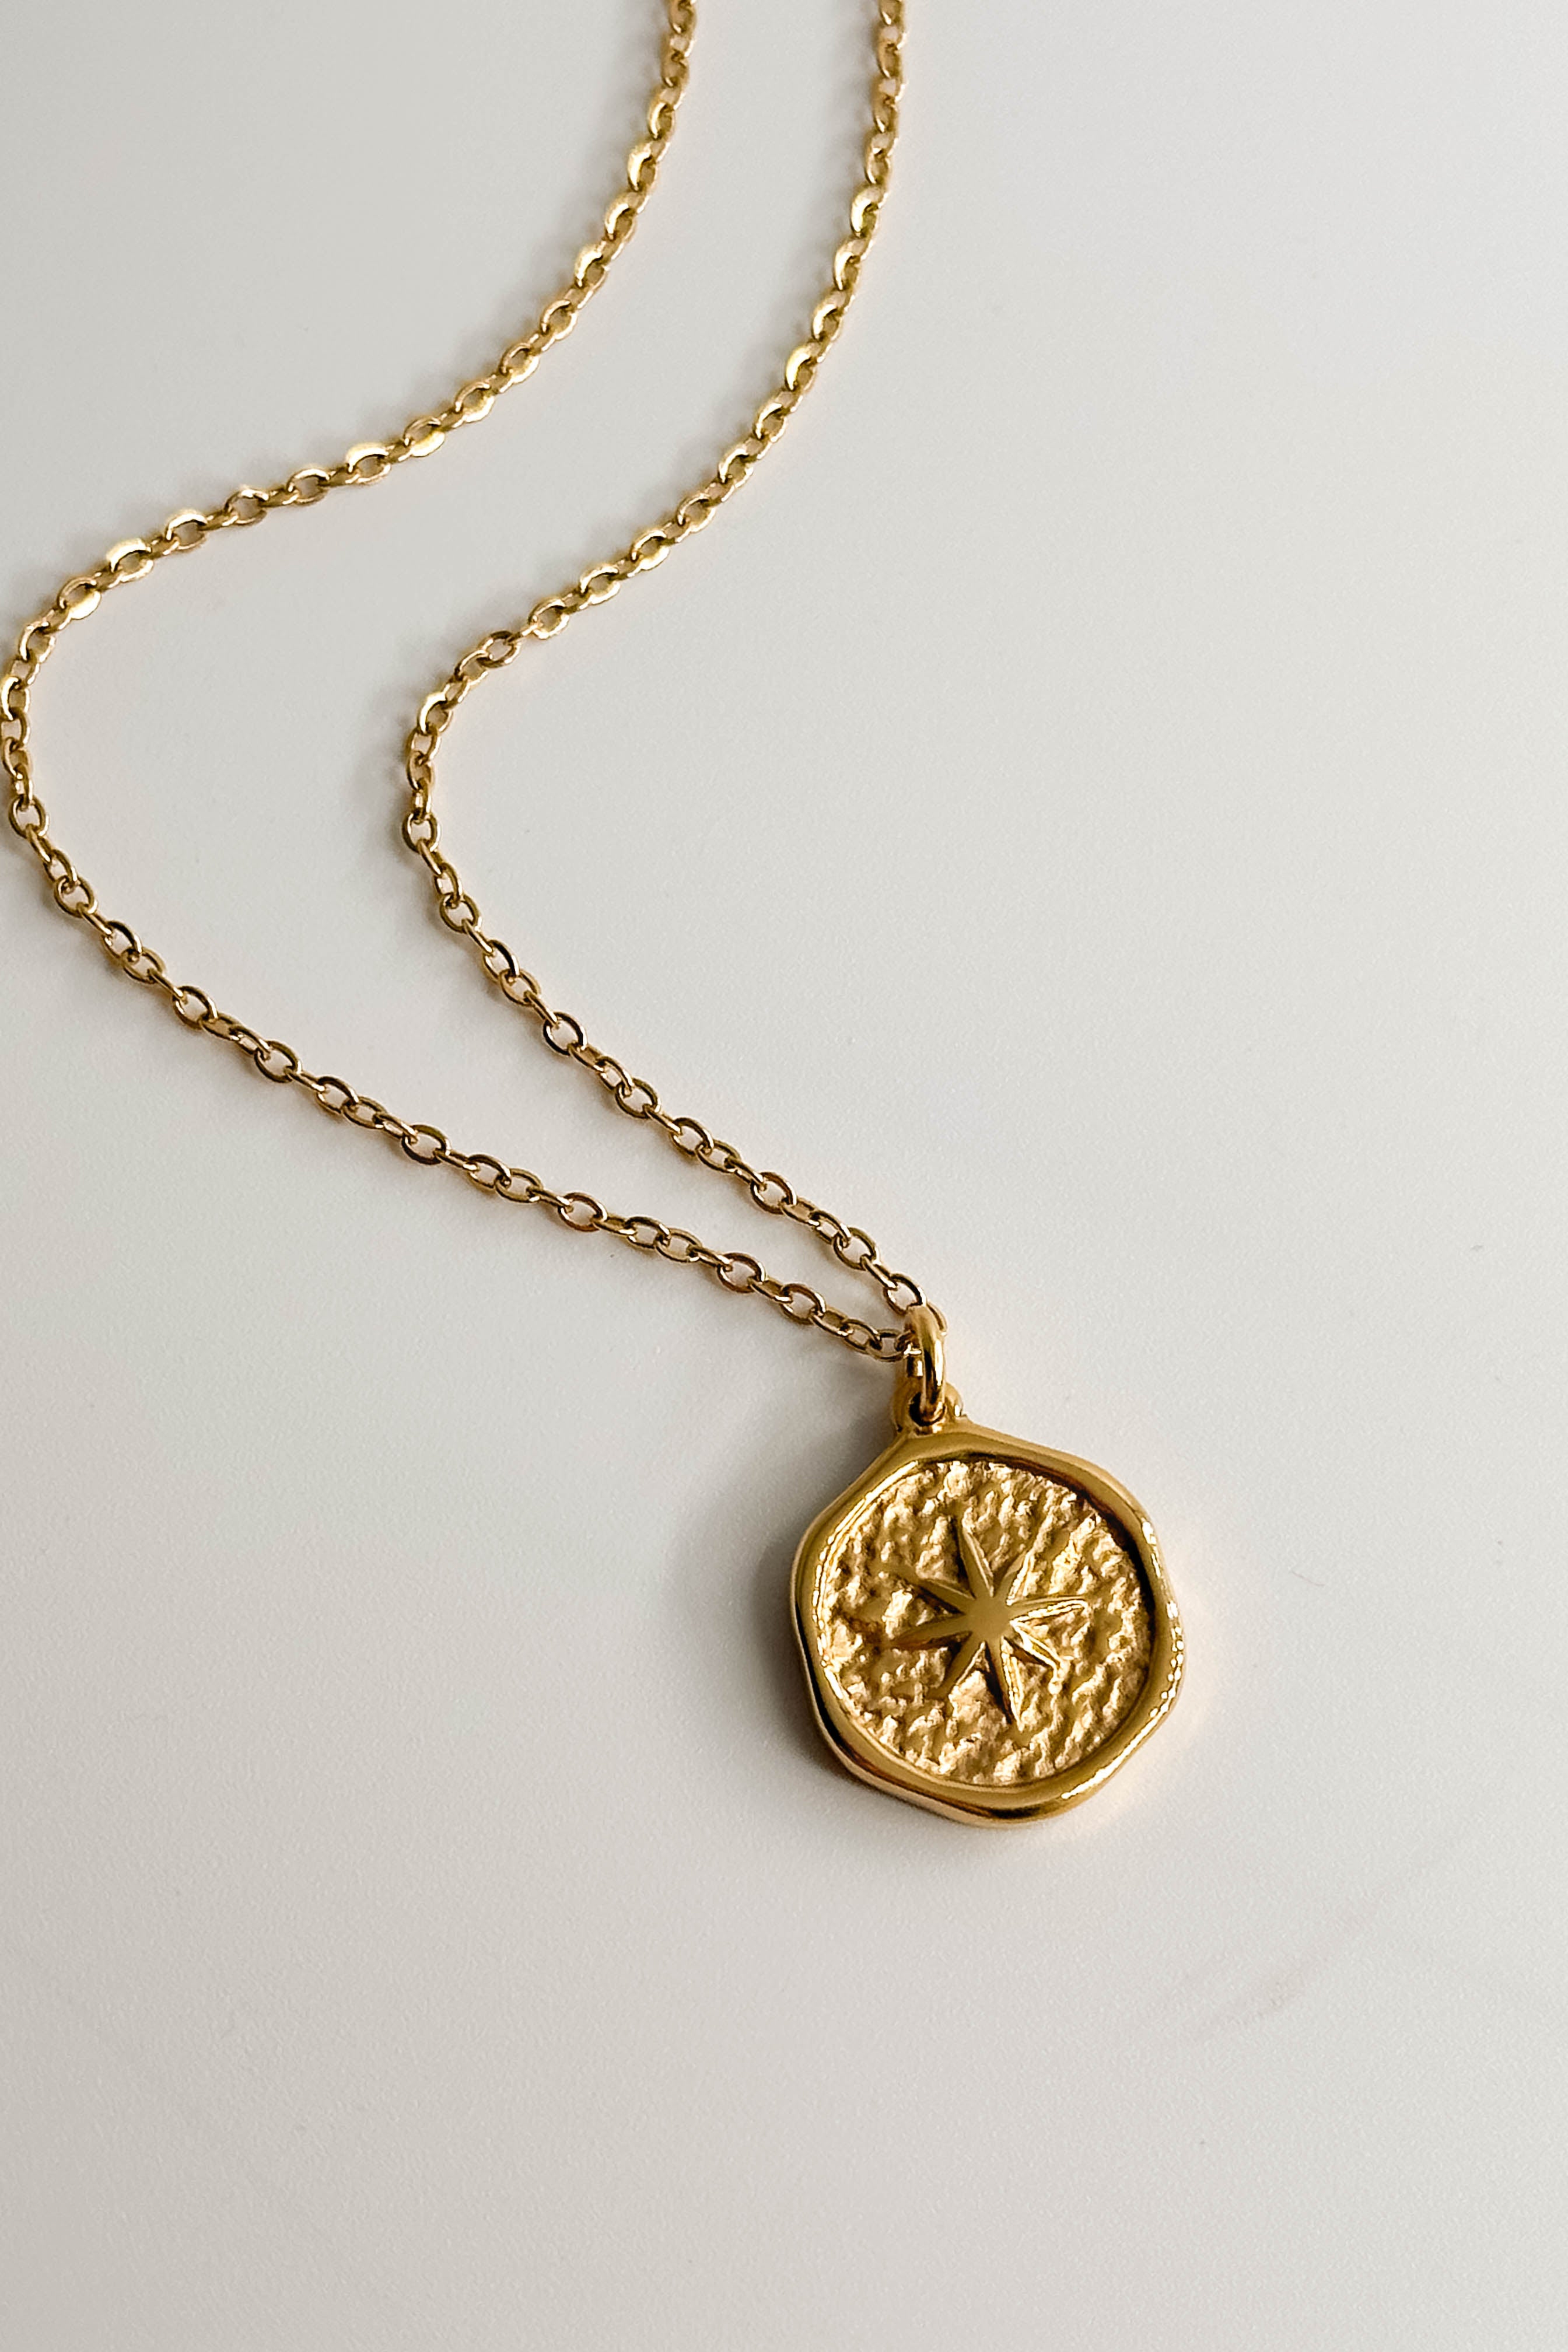 Image shows close-up of the Celeste Gold Star Medallion Necklace against a white background. Necklace has gold chain with circle medallion which has an 8 point star in the center.